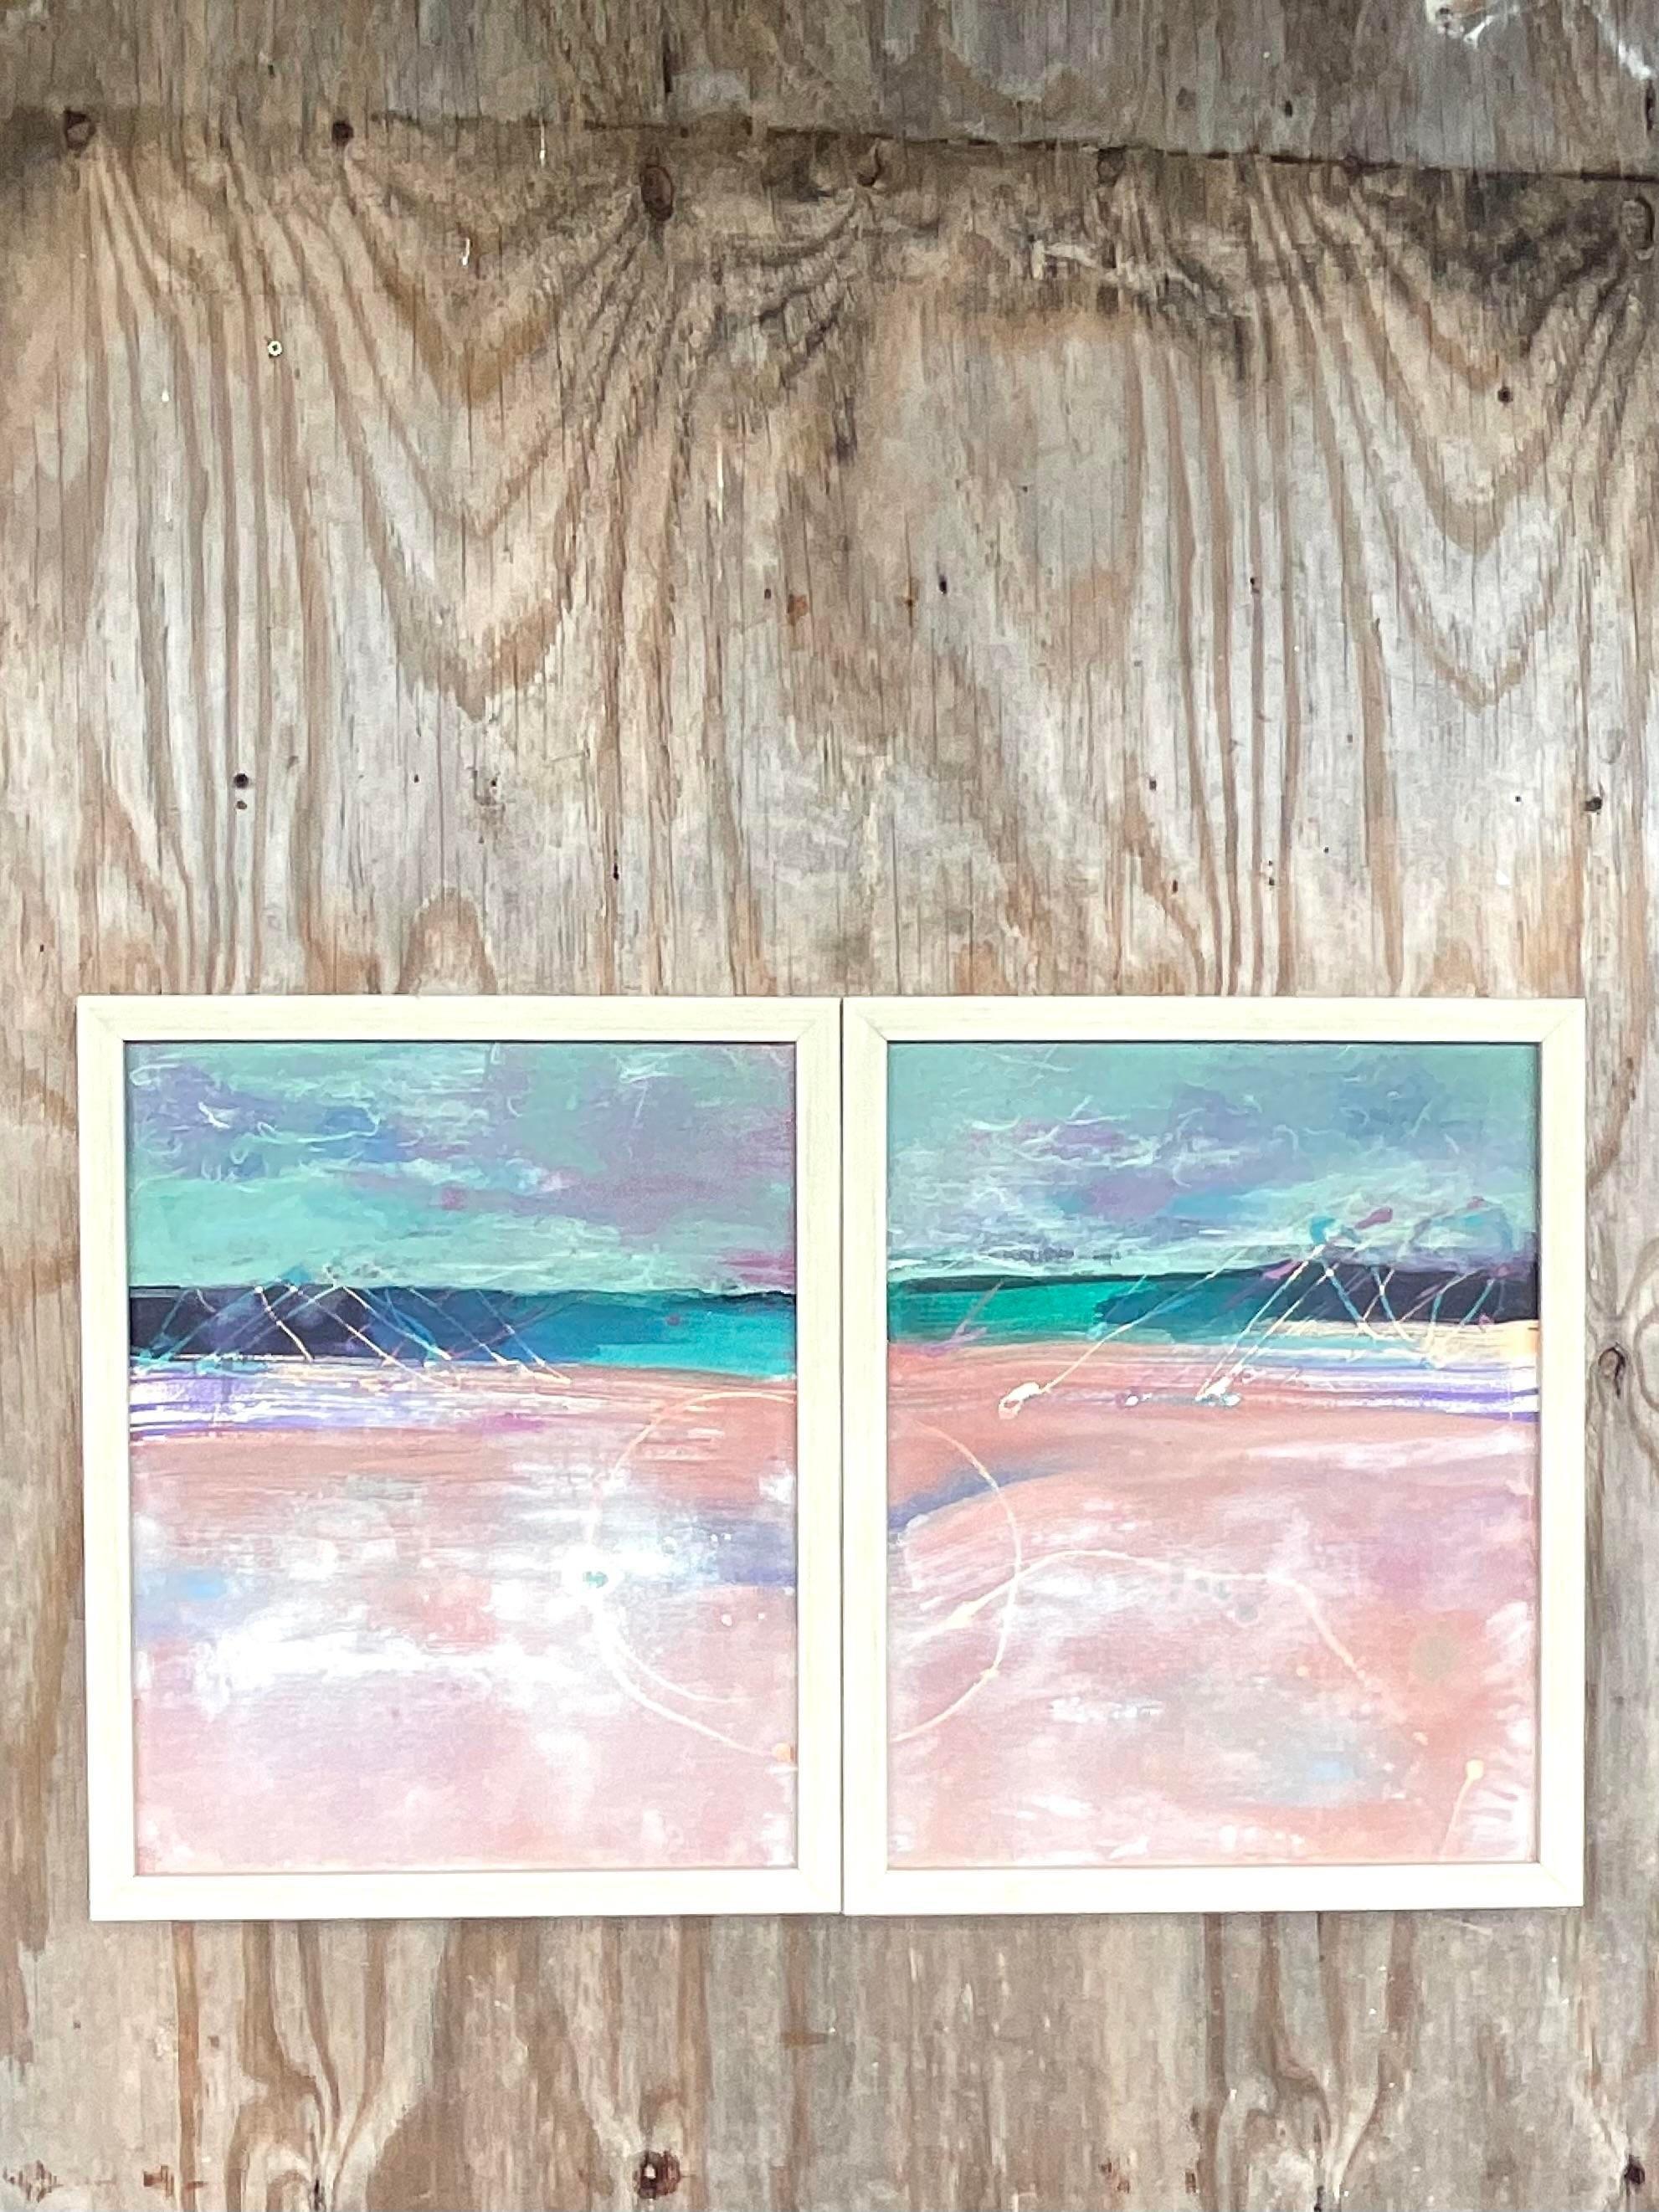 American Vintage Contemporary Original Abstract Oil Paintings on Canvas - Set of 2 For Sale